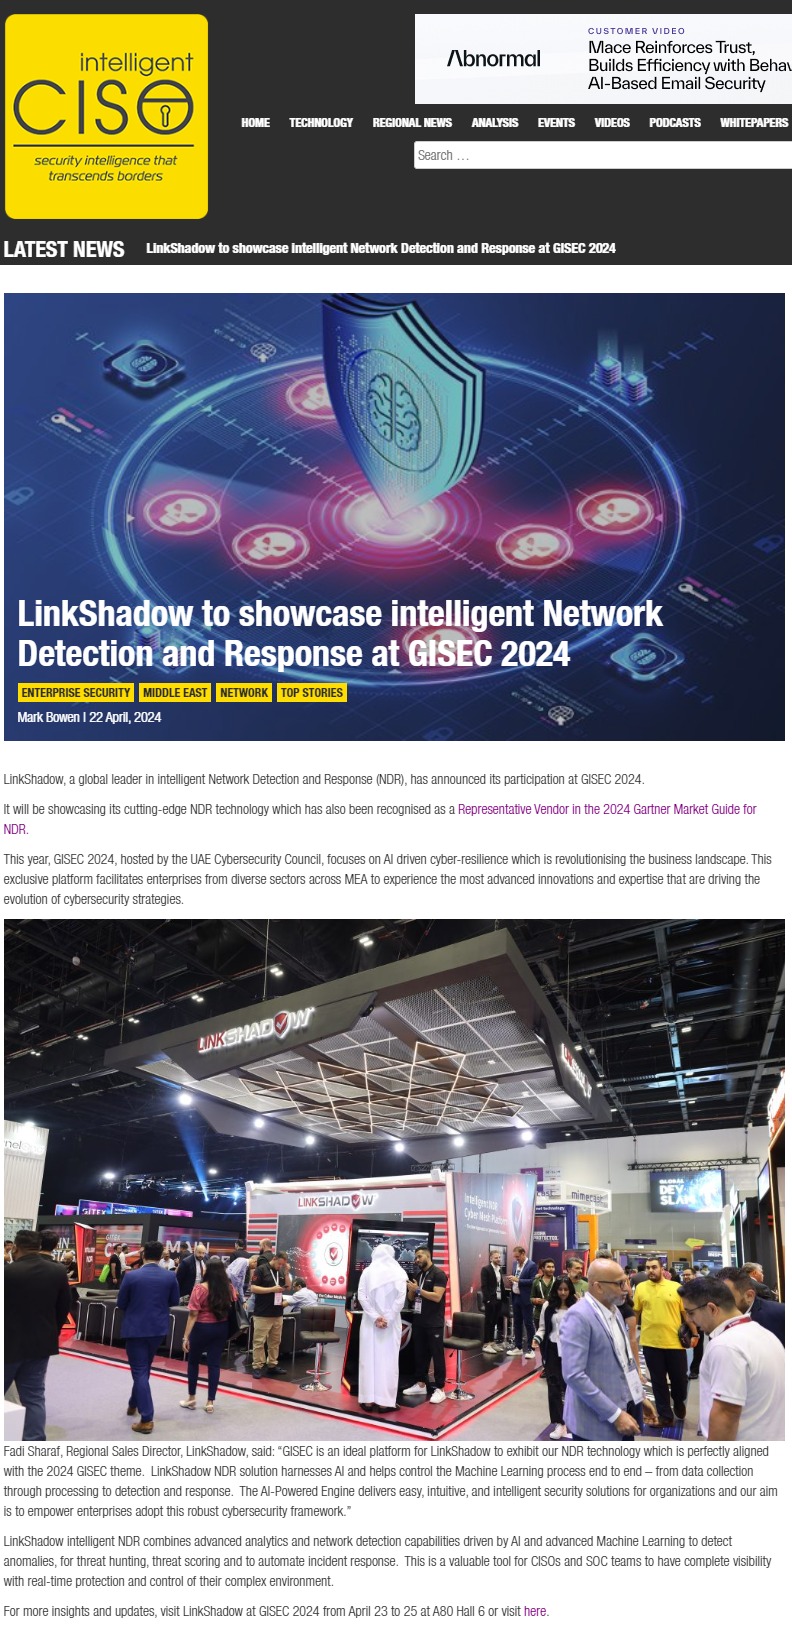 LinkShadow to showcase intelligent Network Detection and Response (NDR) at GISEC 2024